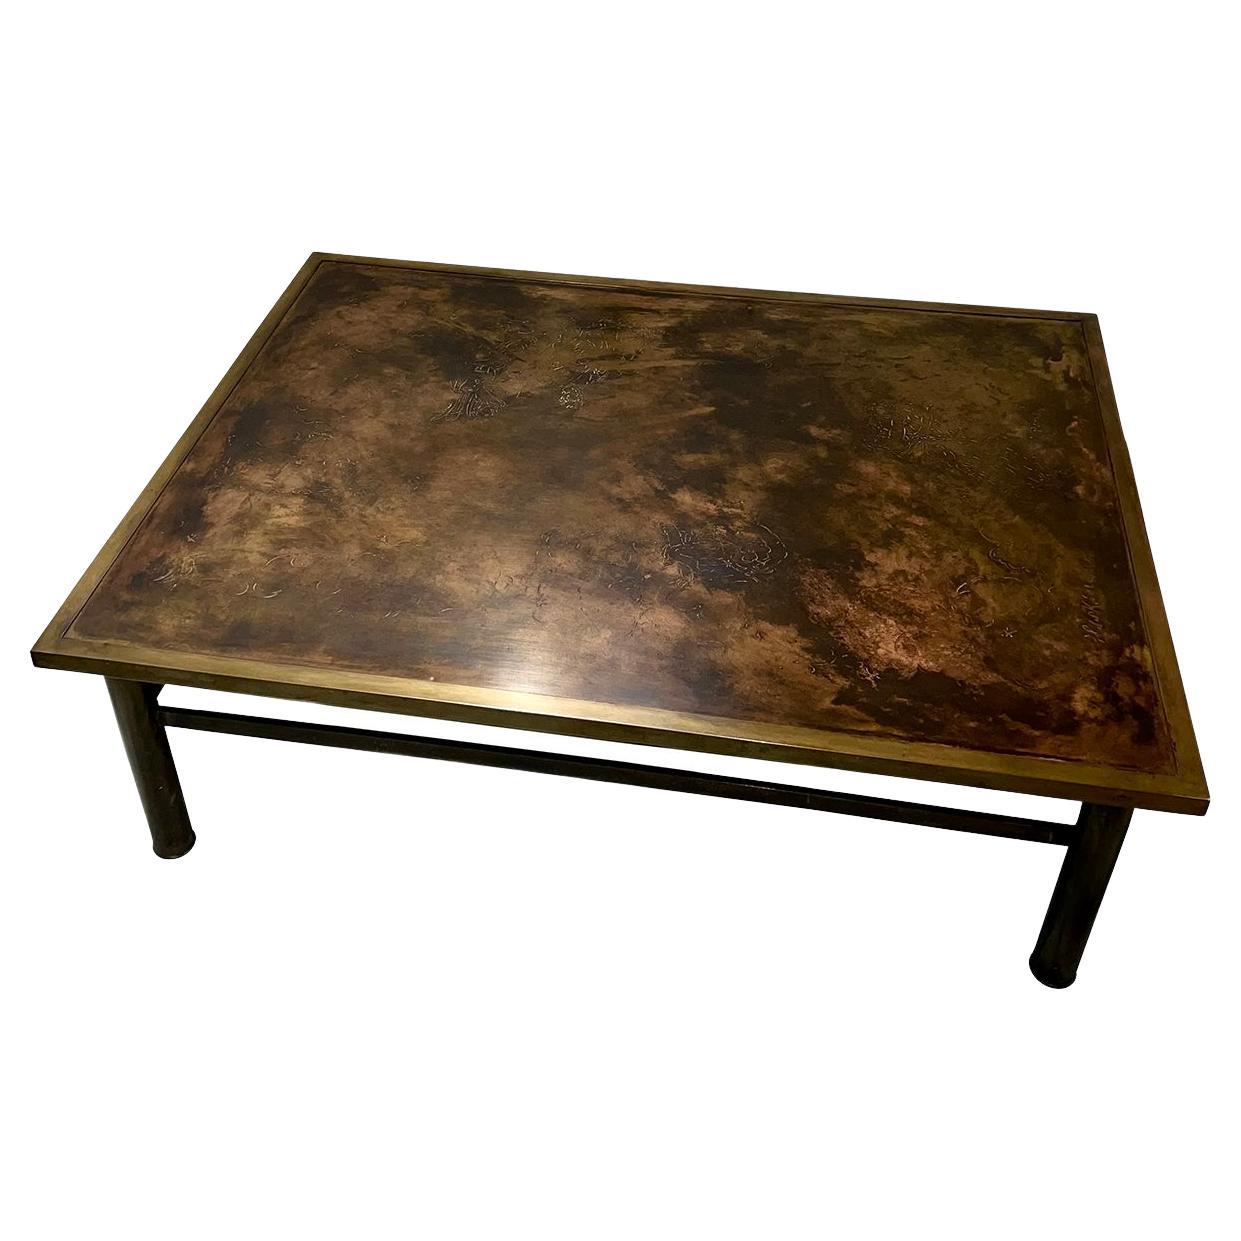 Laverne Rectangular Table with Acid Etched Top For Sale